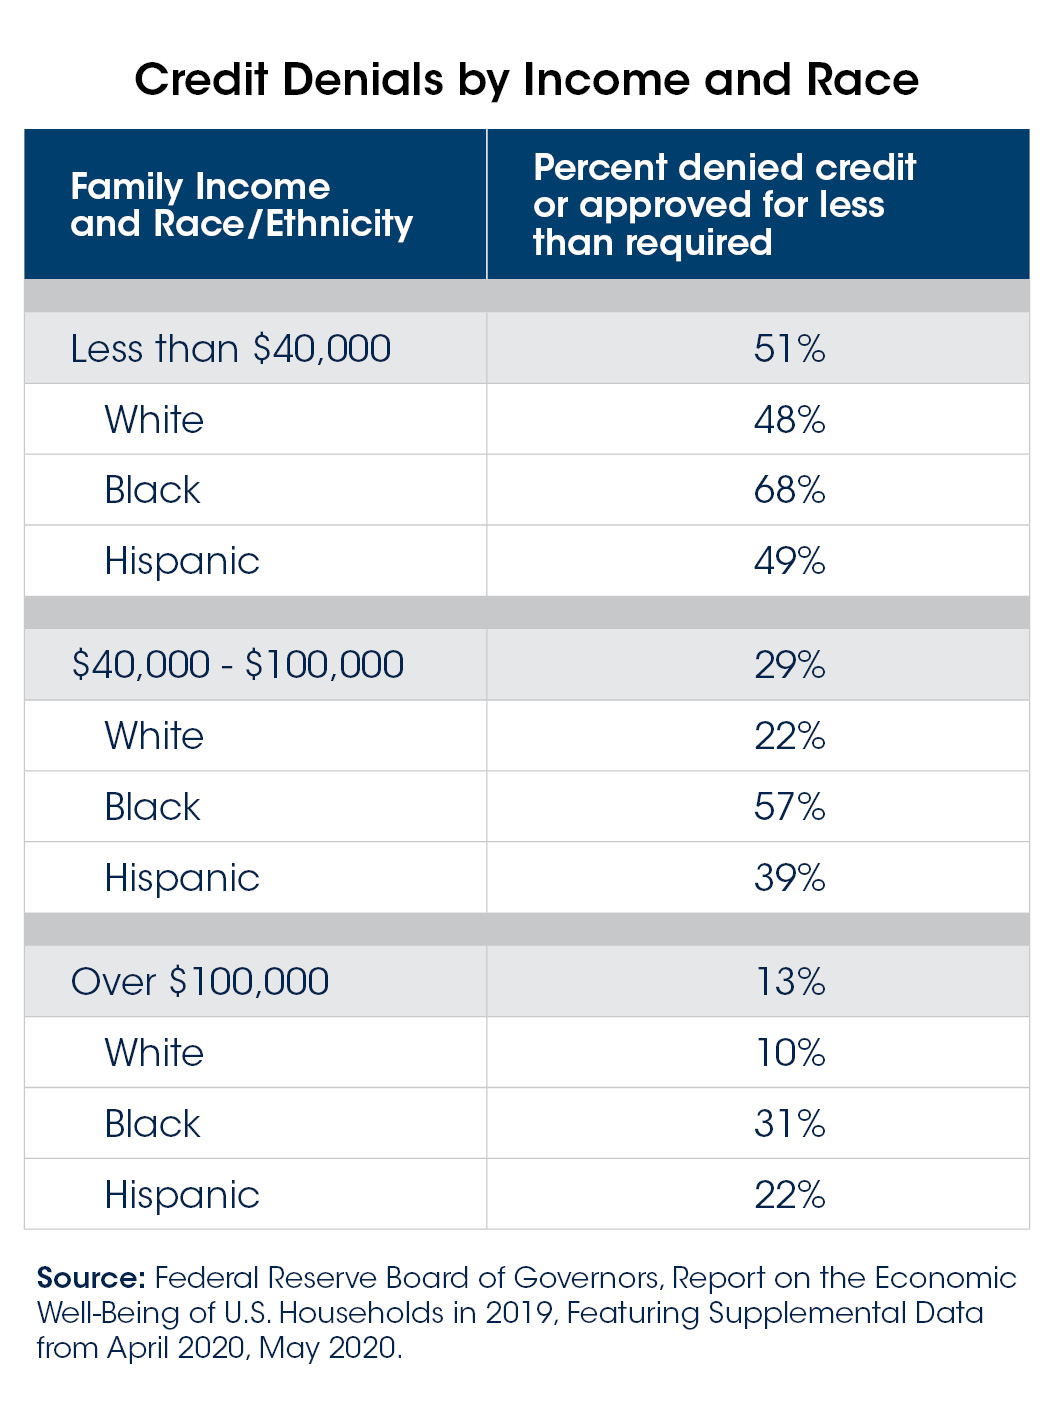 Credit Denial by Income and Race chart